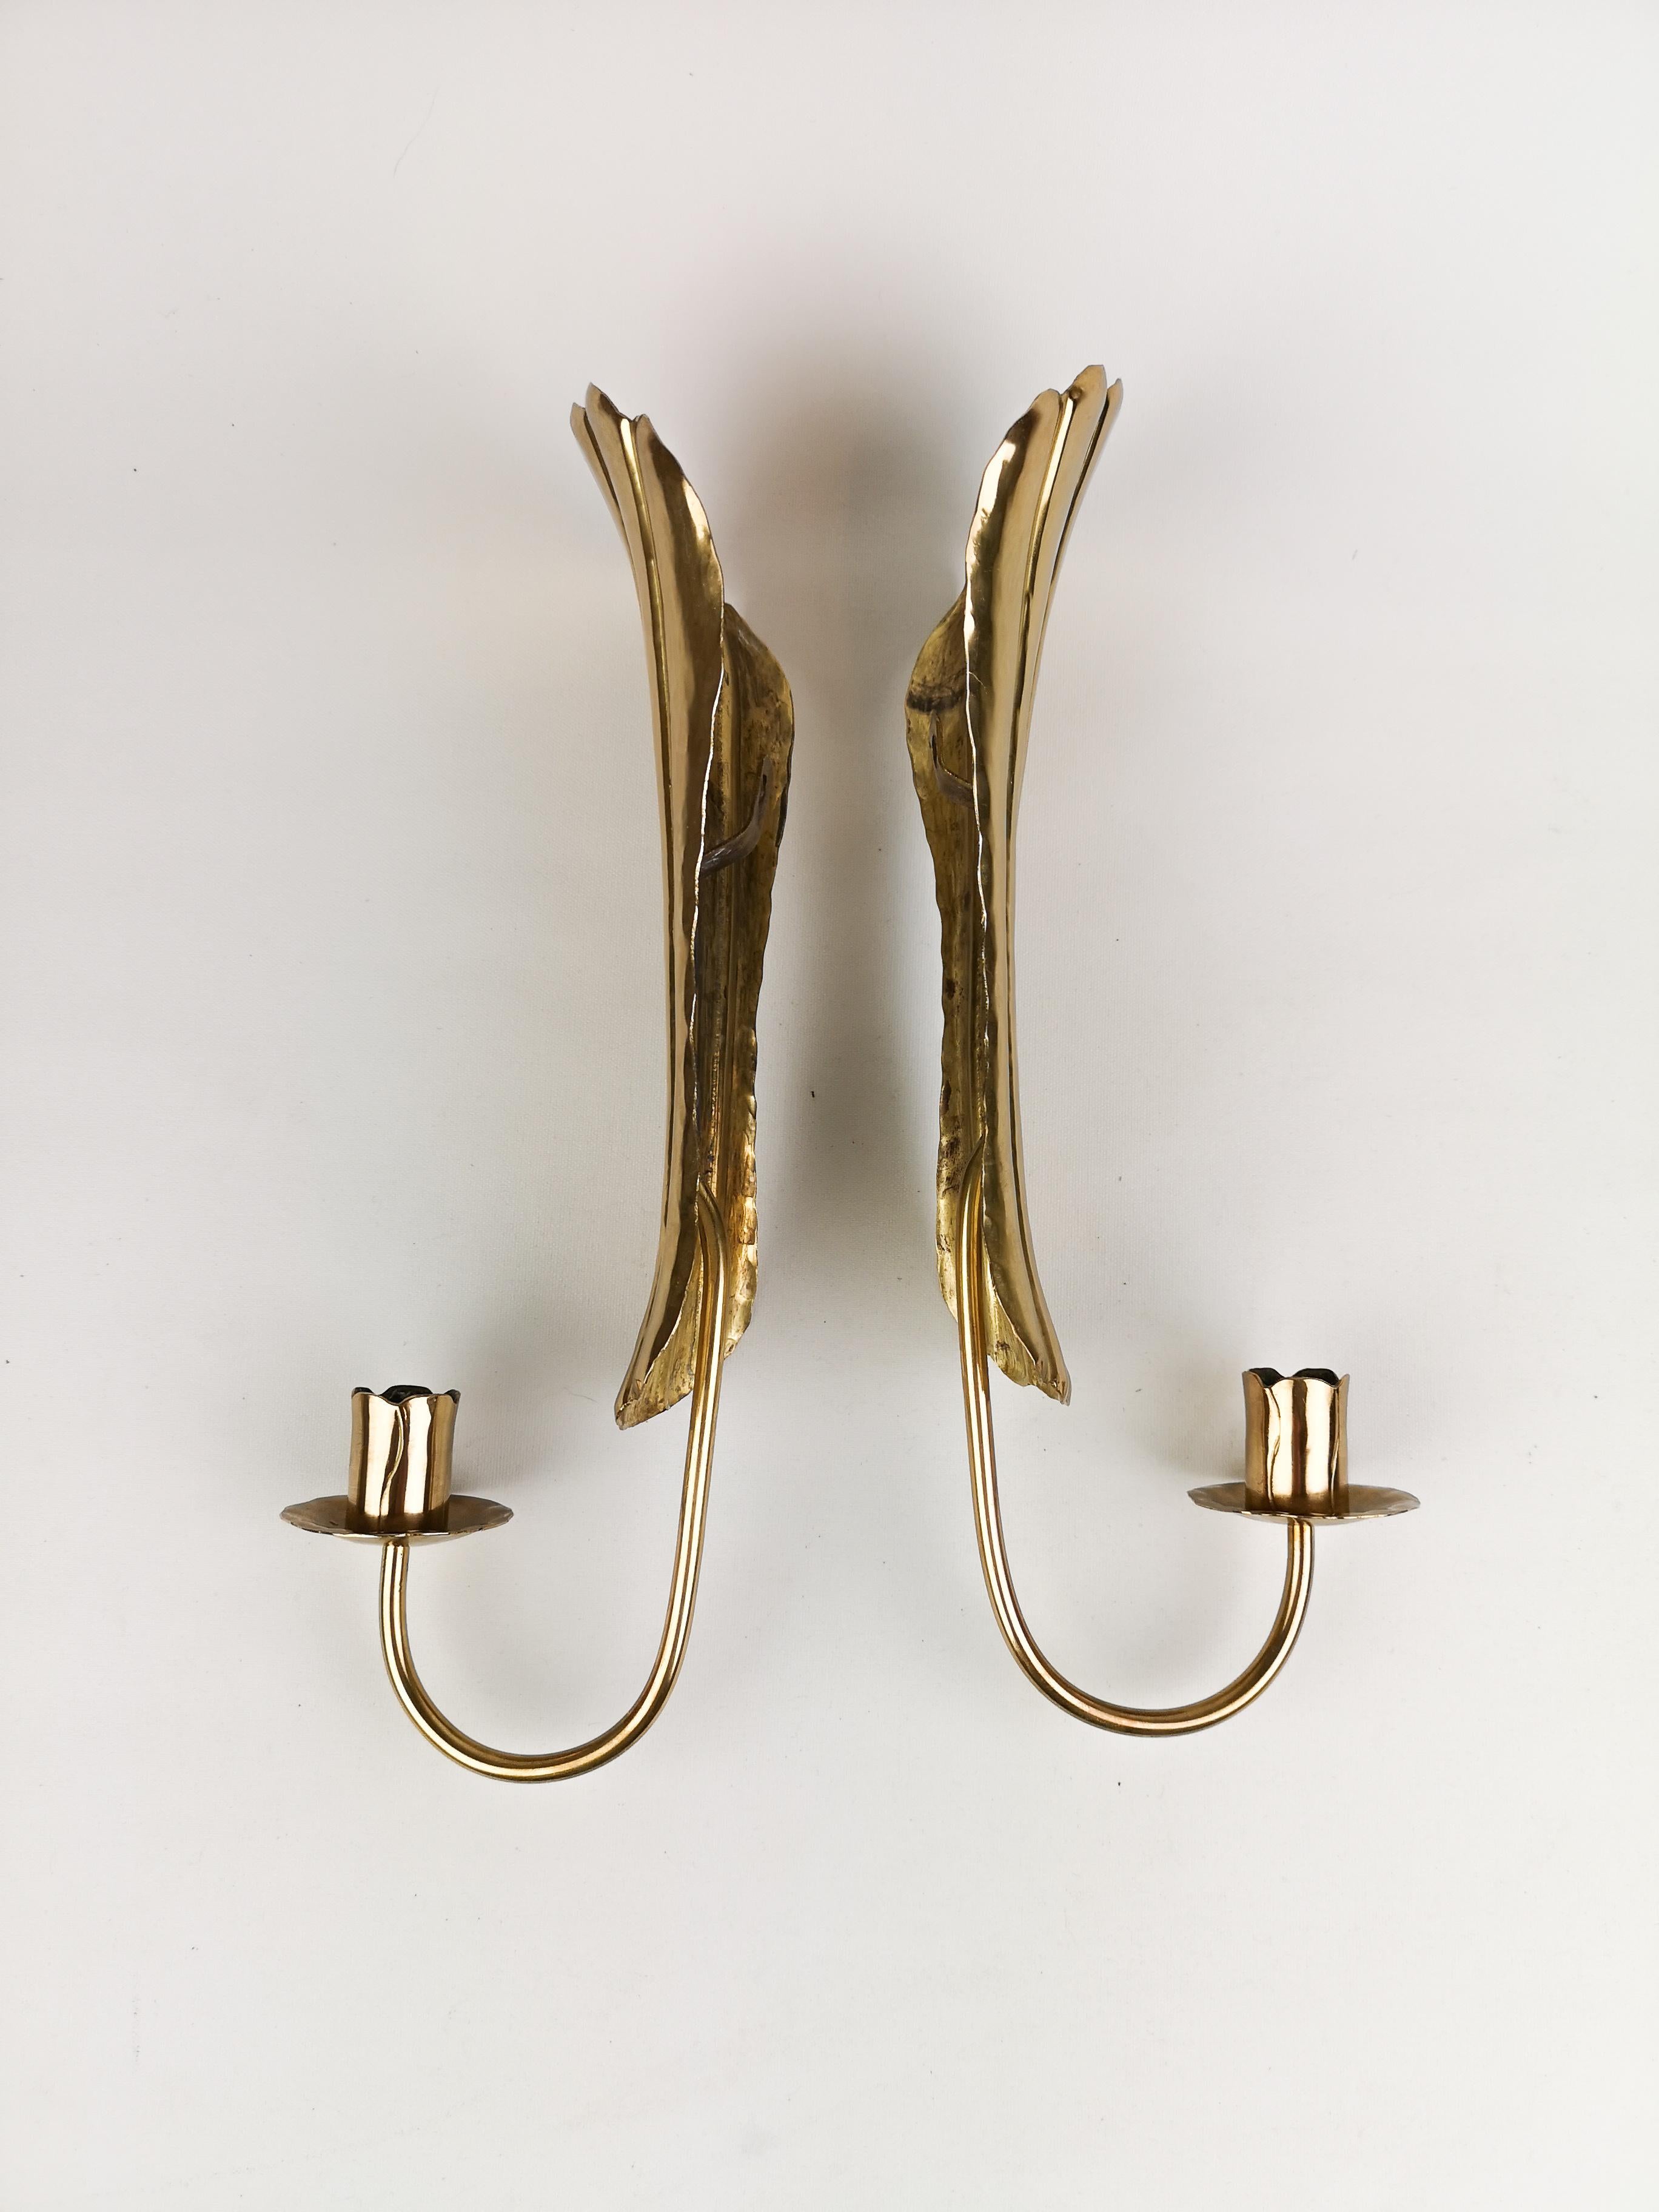 Midcentury Pair of Brass Wall Candlesticks, Sweden, 1960s For Sale 2